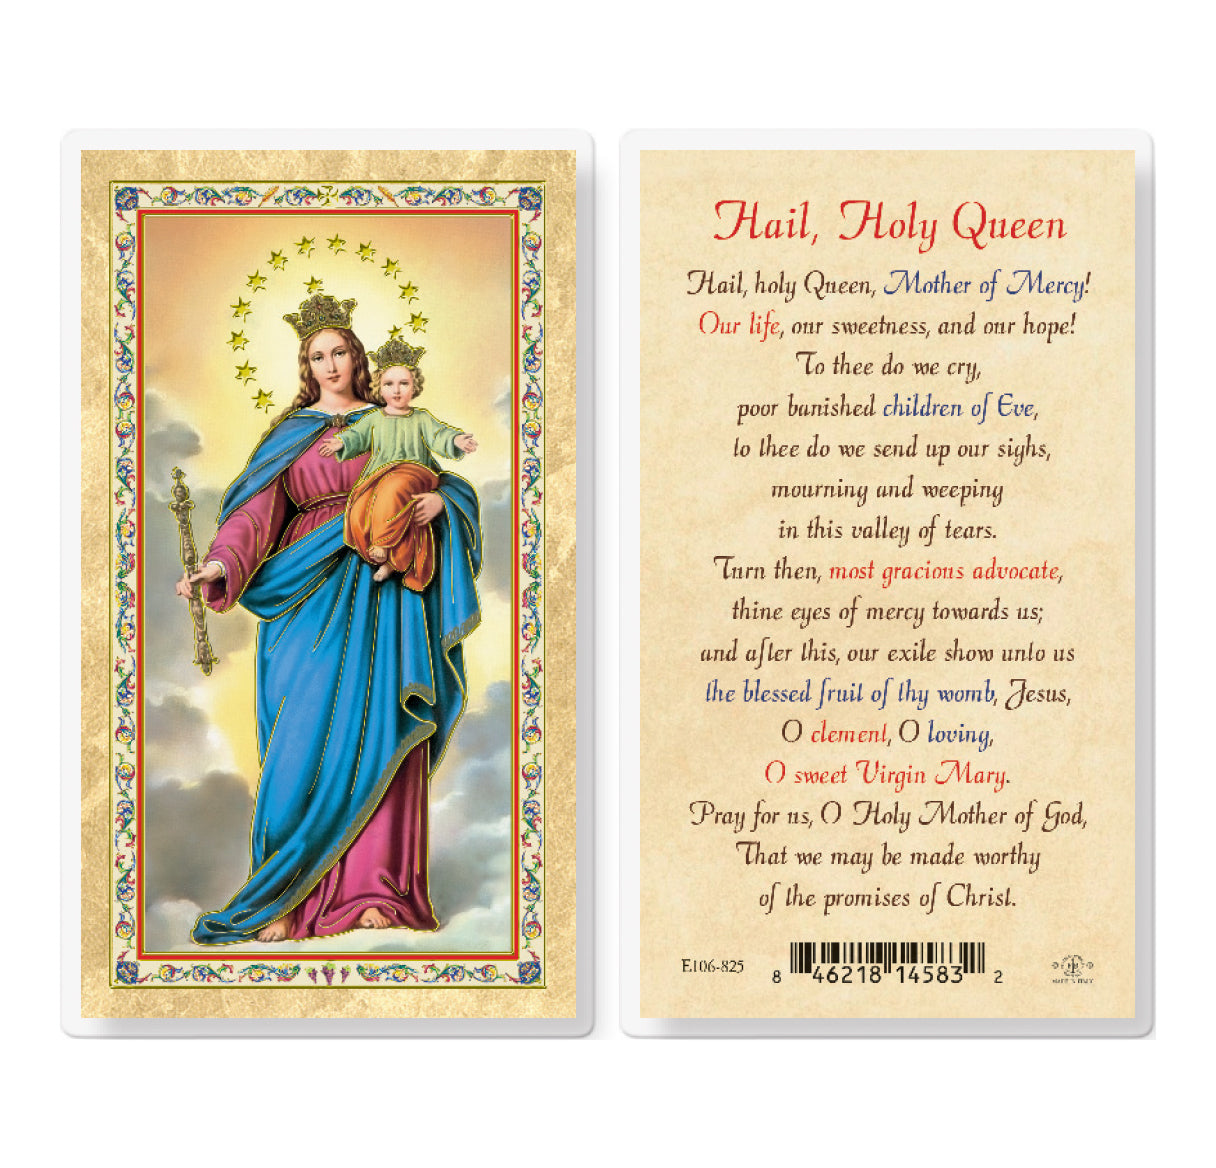 Hail Holy Queen Gold-Stamped Laminated Catholic Prayer Holy Card with Prayer on Back, Pack of 25